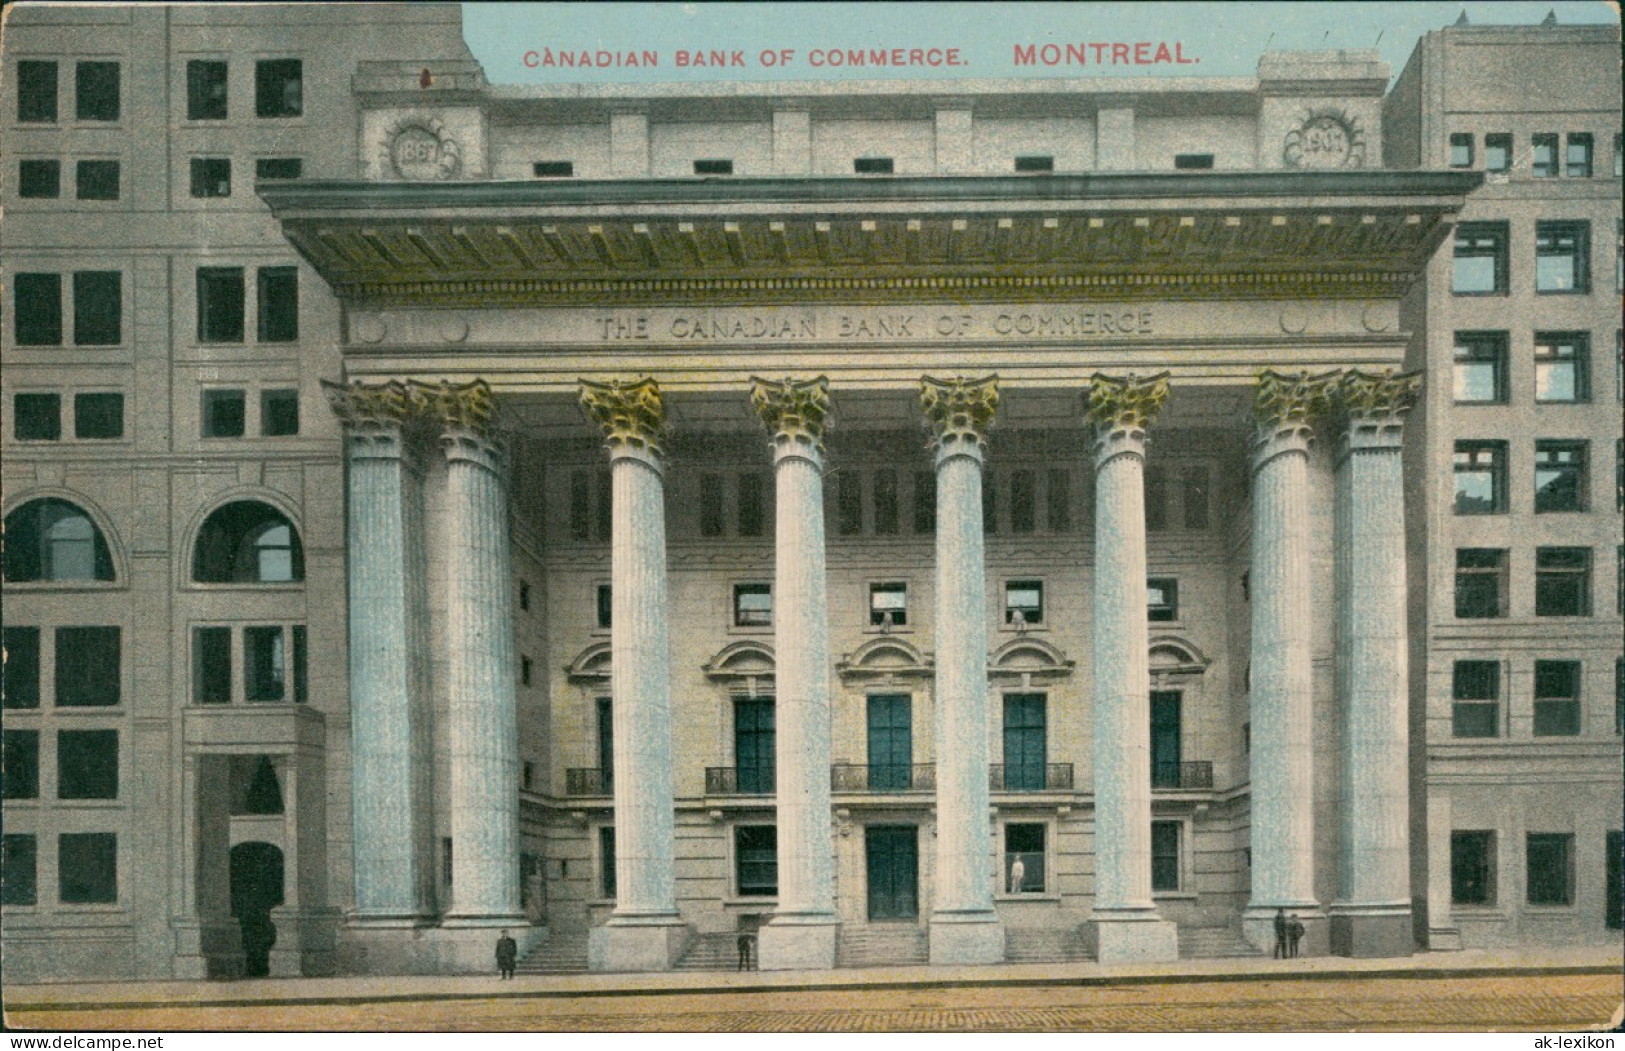 Postcard Montreal CANADIAN BANK OF COMMERCE, Bank Gebäude-Ansicht 1910 - Montreal